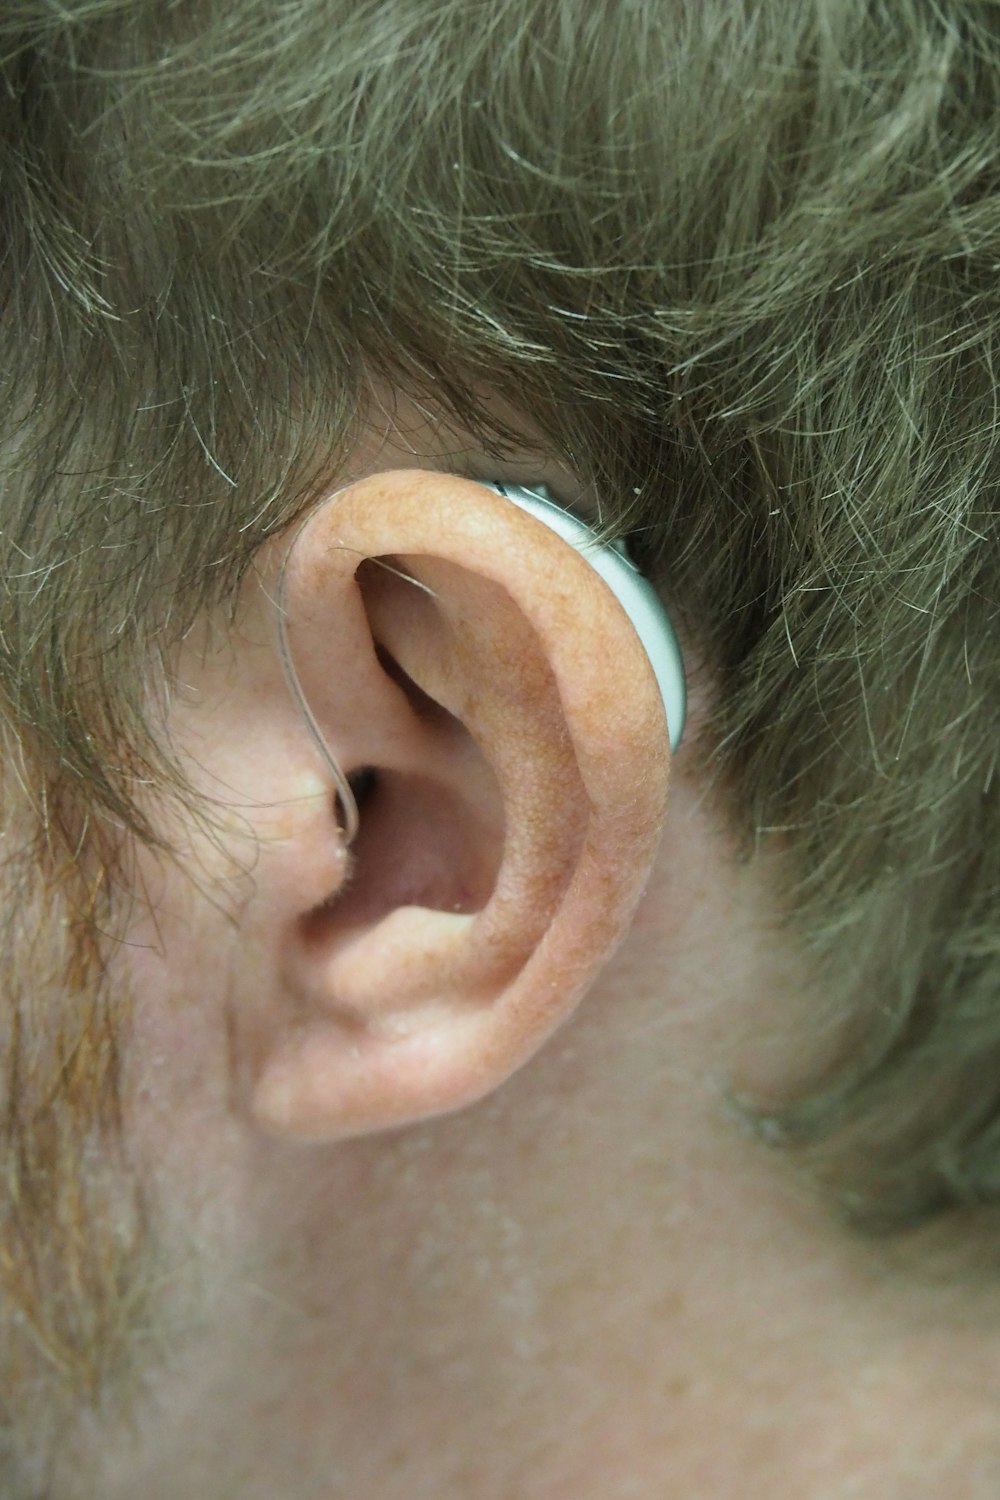 a close up of a person with a fake ear